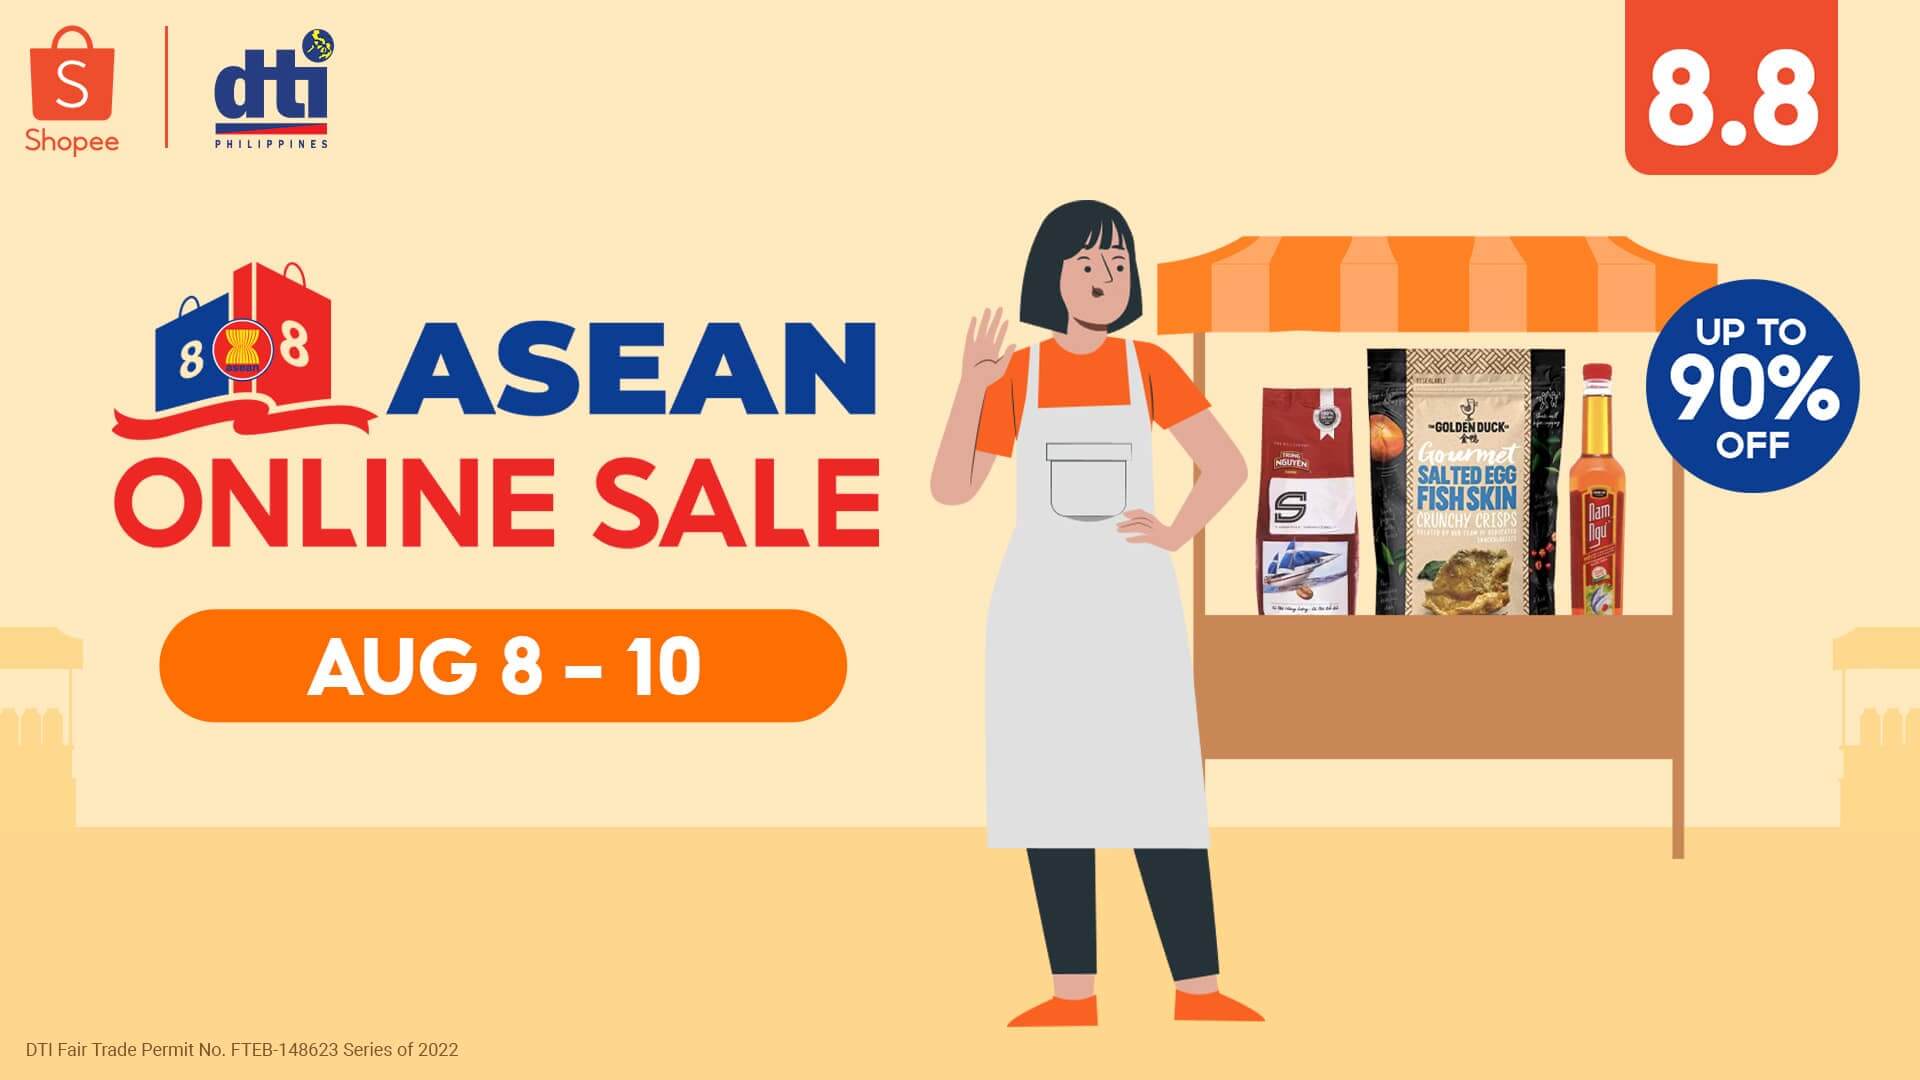 Shopee and the Department of Trade and Industry partners for the 3rd ASEAN Online Sale